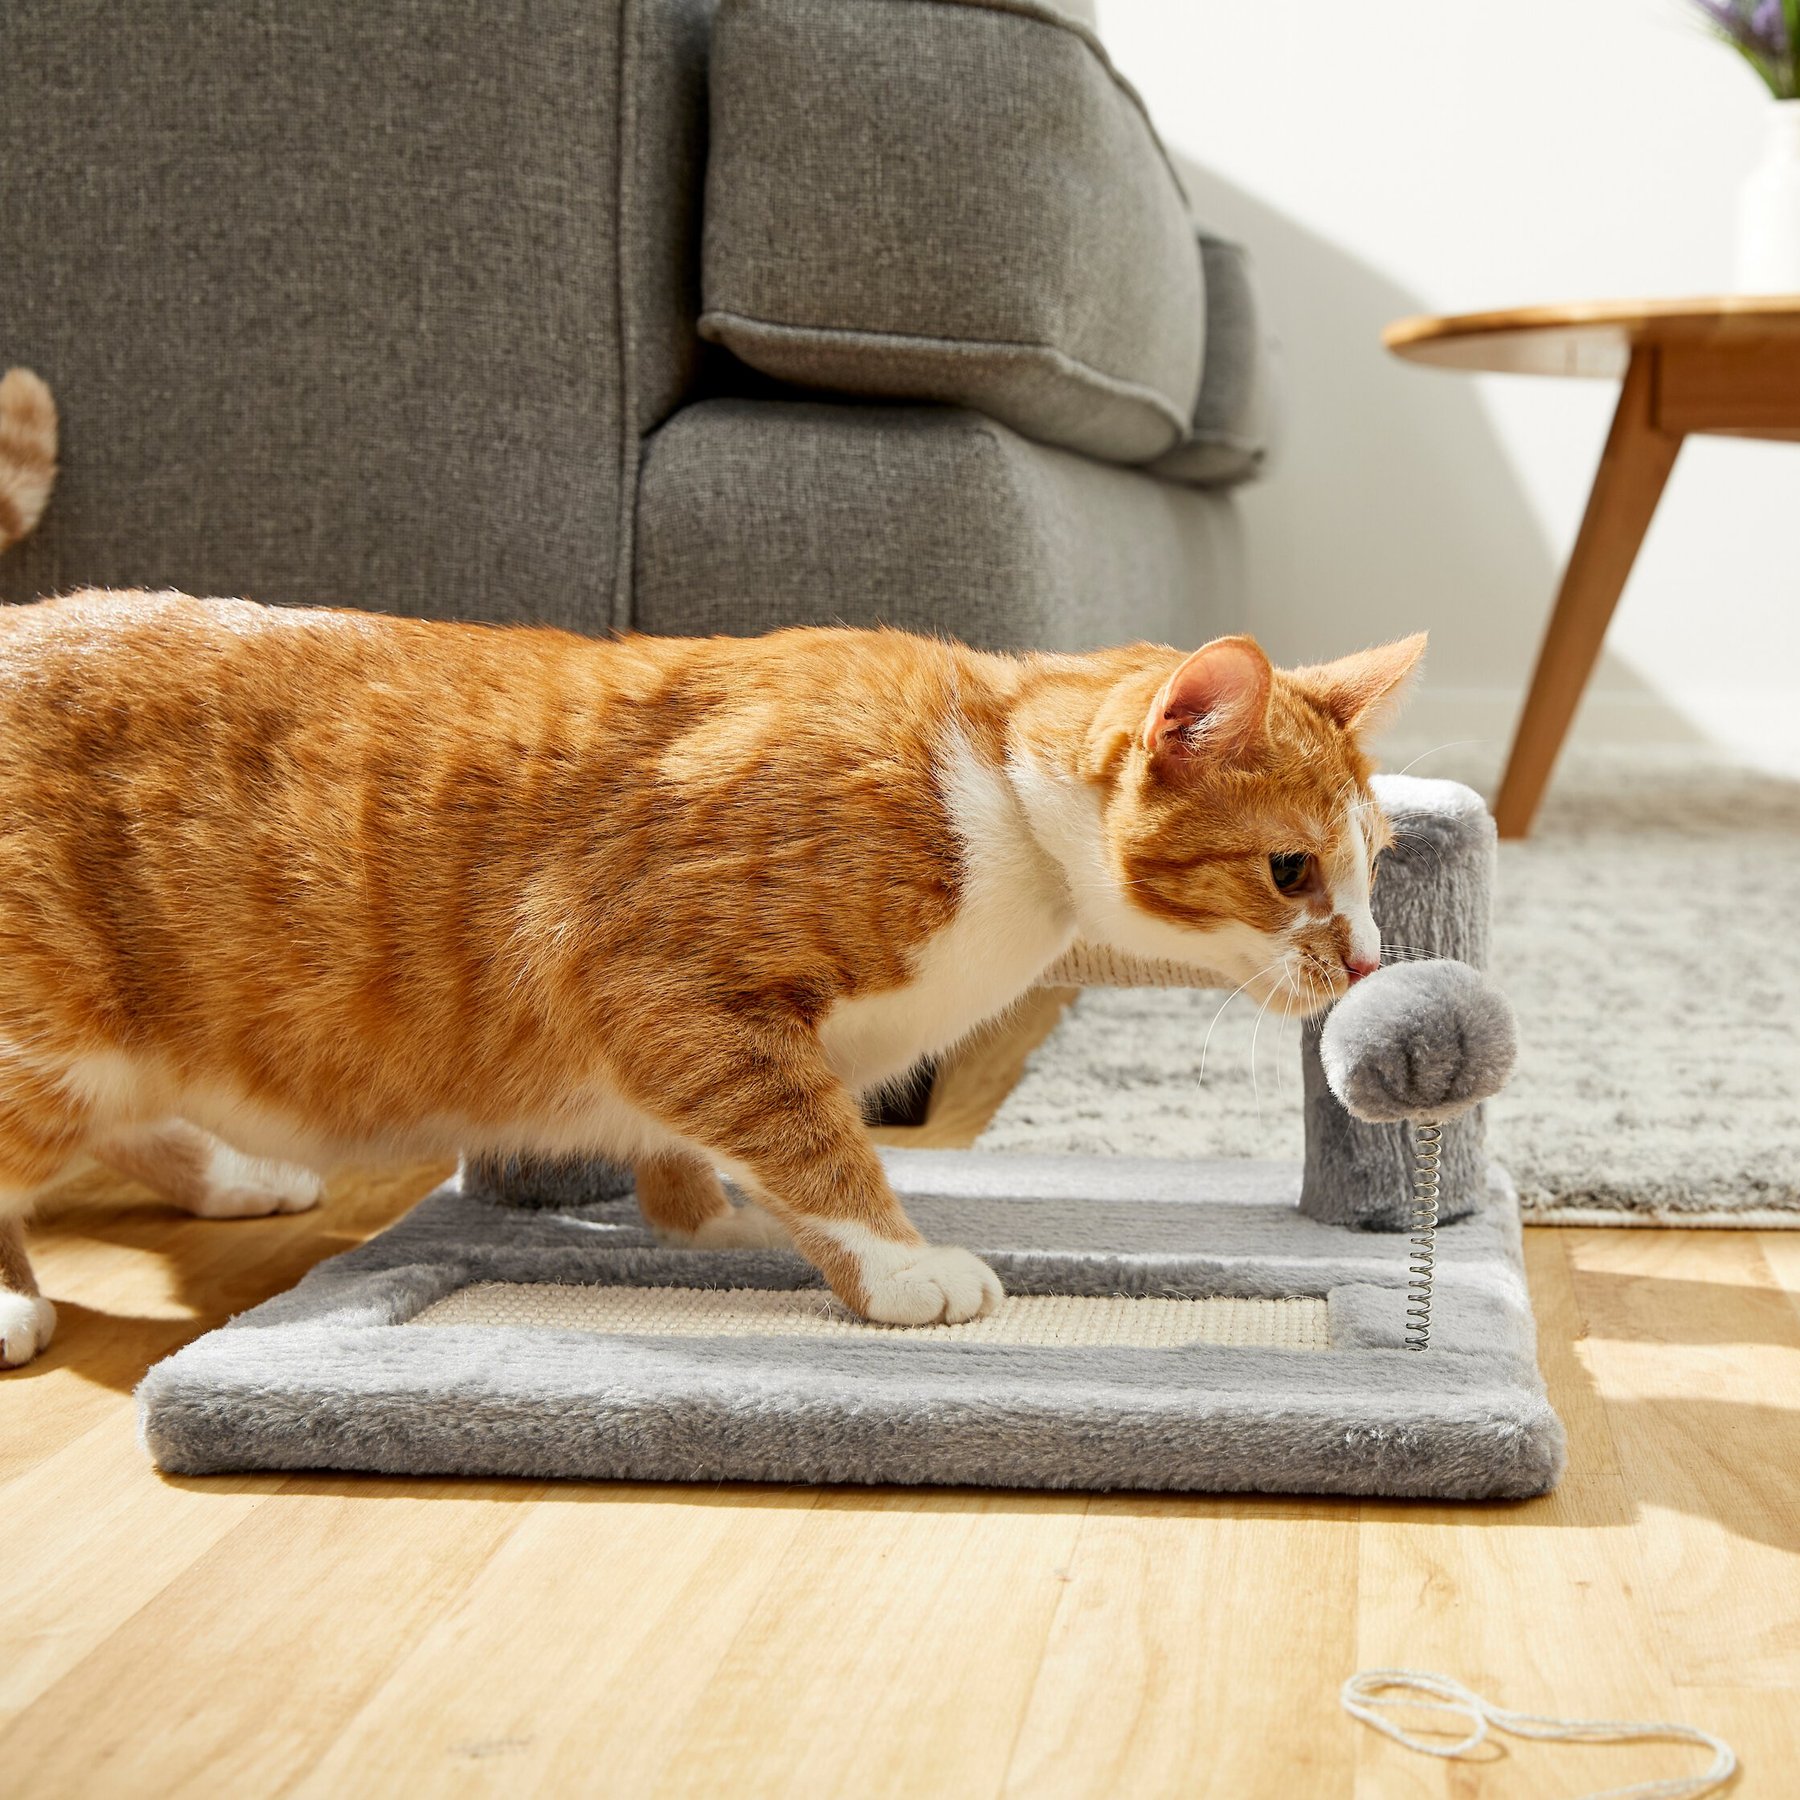 Akarden Cat Scratching Post for Floor or Wall Durable Sisal Board Scratcher for Kitty’s Health and Good Behavior